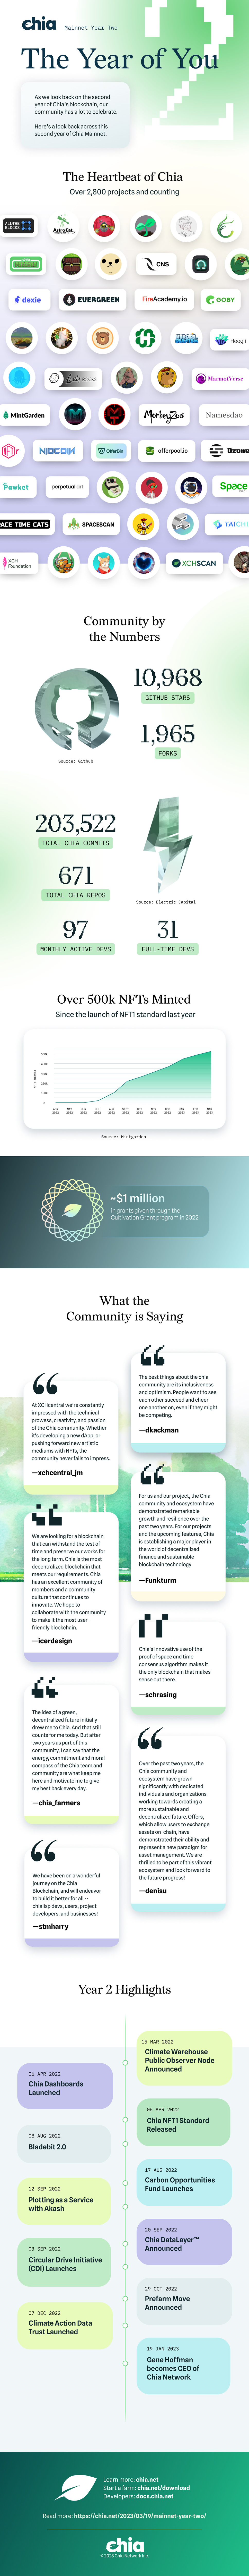 infographic with statistics, quotes, timeline about Chia mainnet year 2